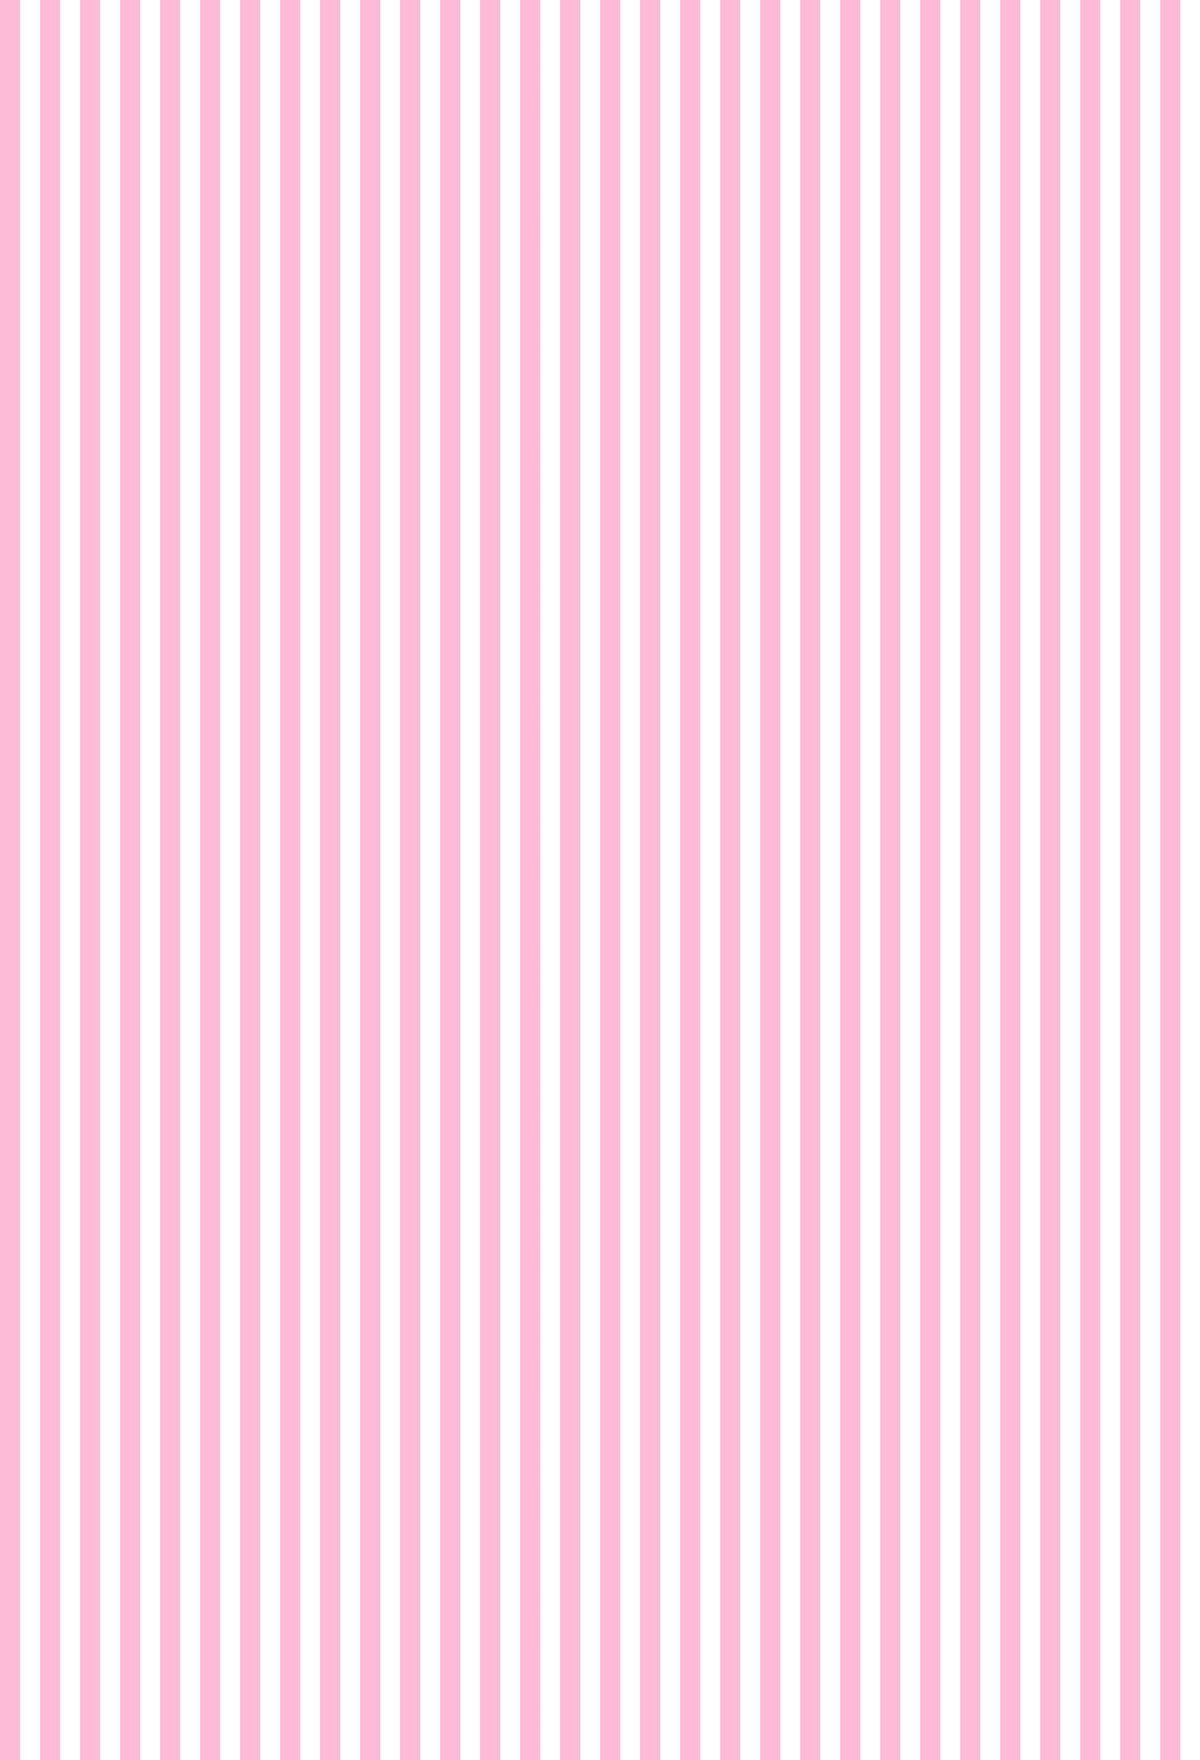 Vertical Pink Stripe Peel and Stick Smooth Vinyl Wallpaper W9161VinylPink216   The Home Depot